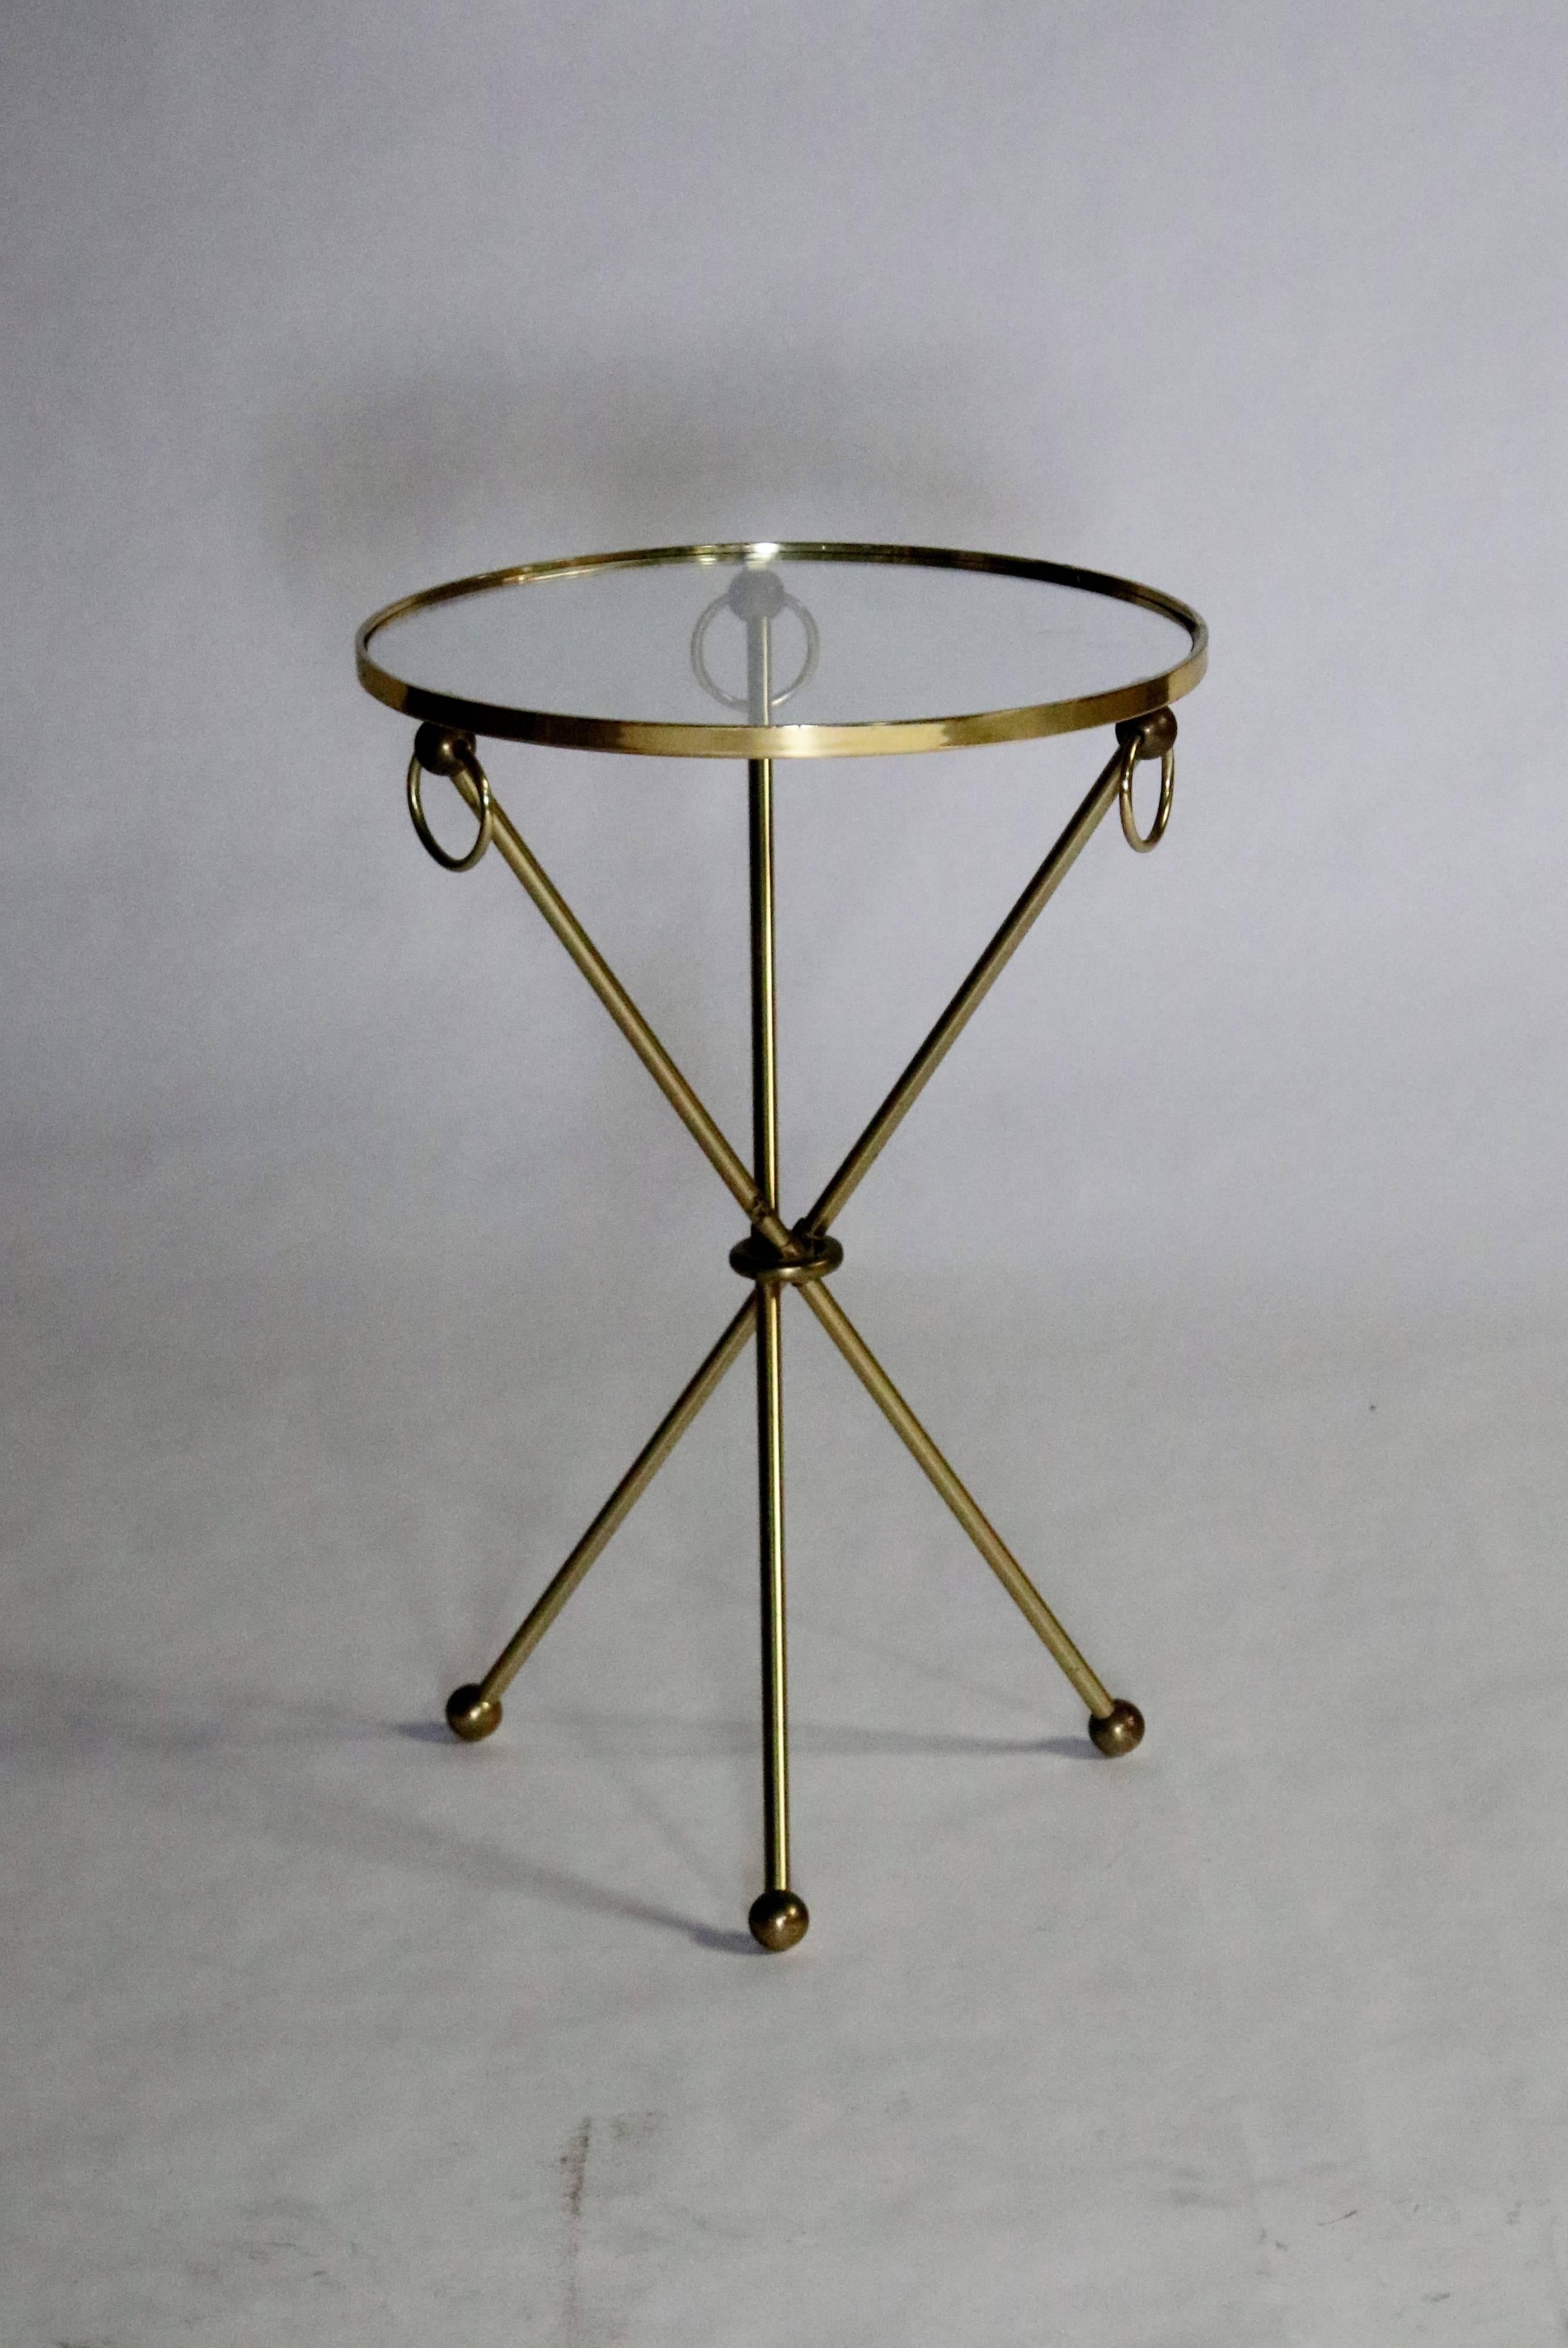 Midcentury brass tripod side table with glass inset top, loop handles and brass ball feet.